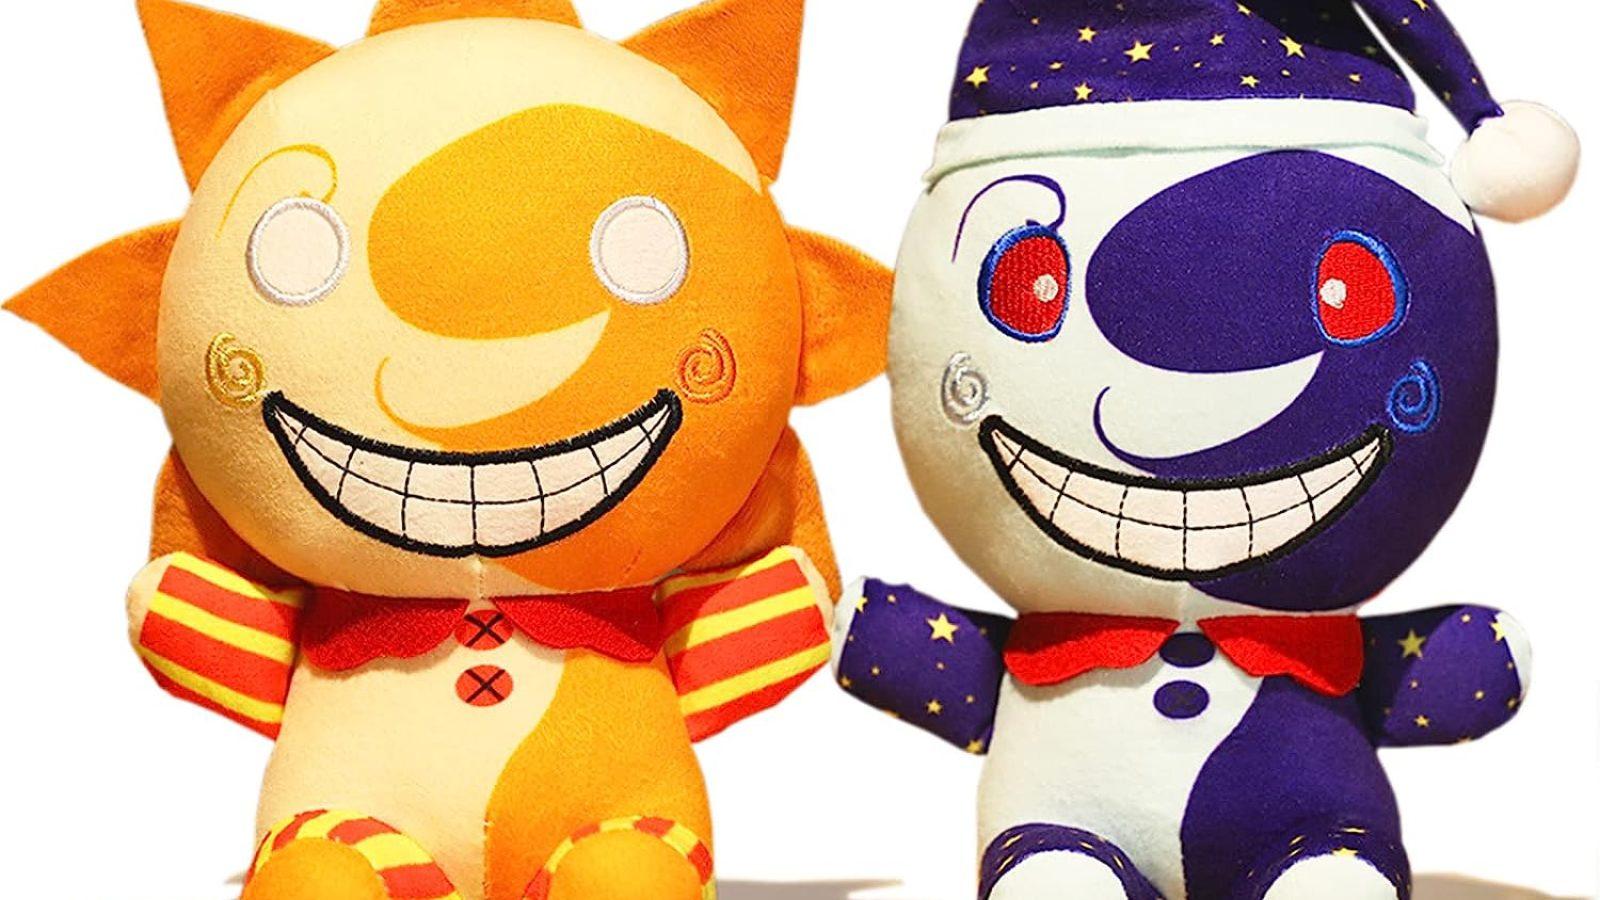 Five Nights at Freddy's Sundrop and Moondrop plushies together